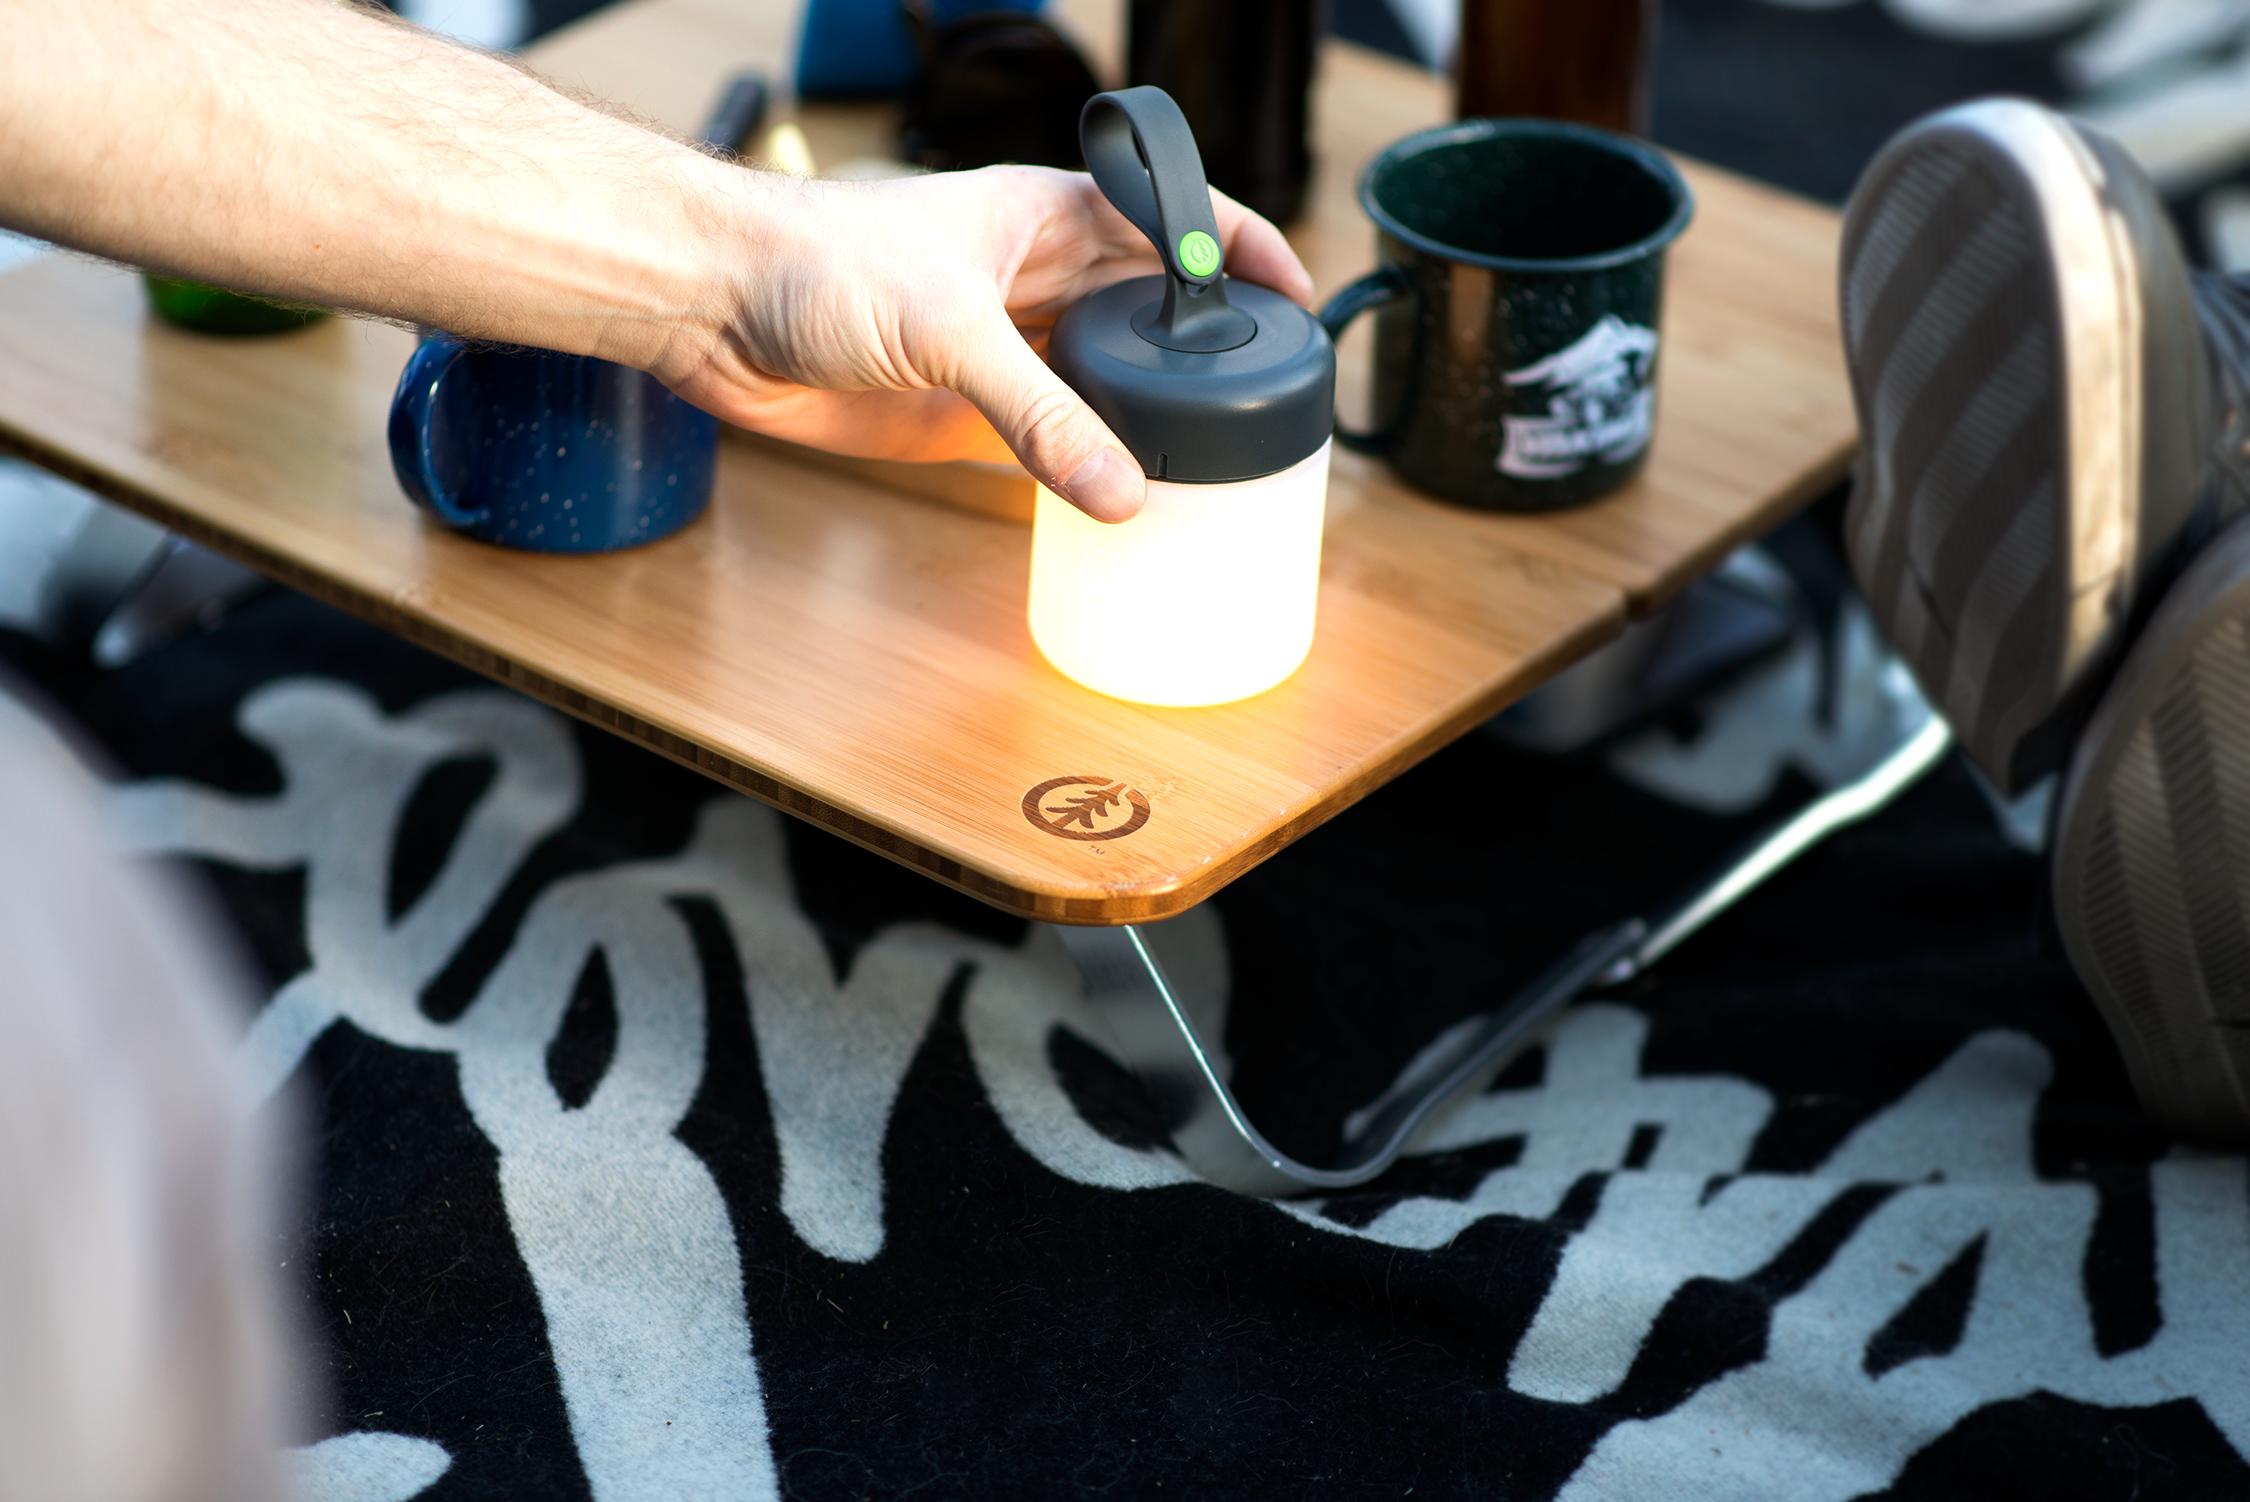 Person placing a small cylindrical silicone lantern next to two metal camping mugs on a small wooden table that has angled metal supports on two sides